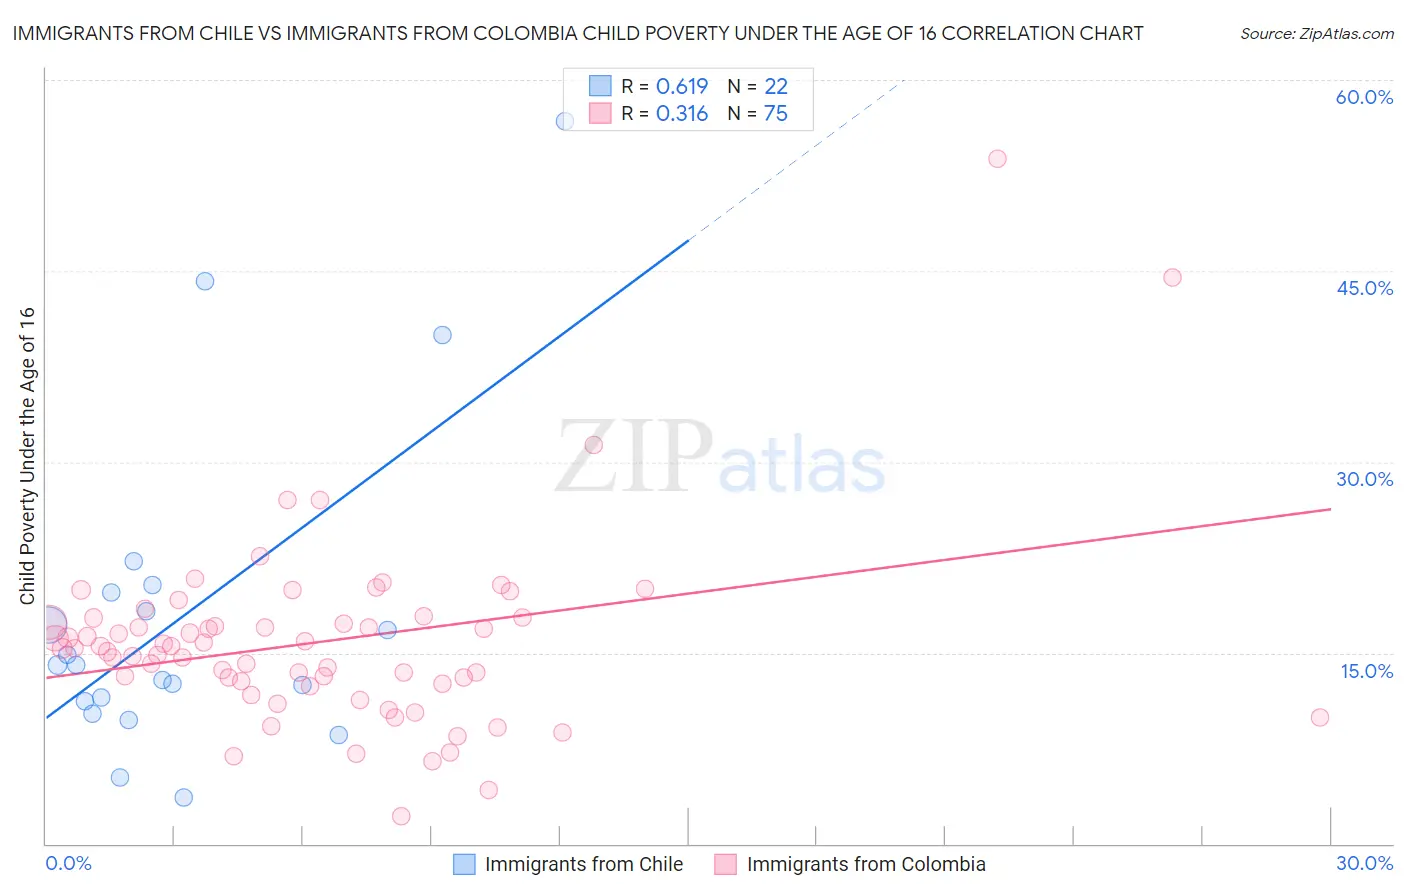 Immigrants from Chile vs Immigrants from Colombia Child Poverty Under the Age of 16